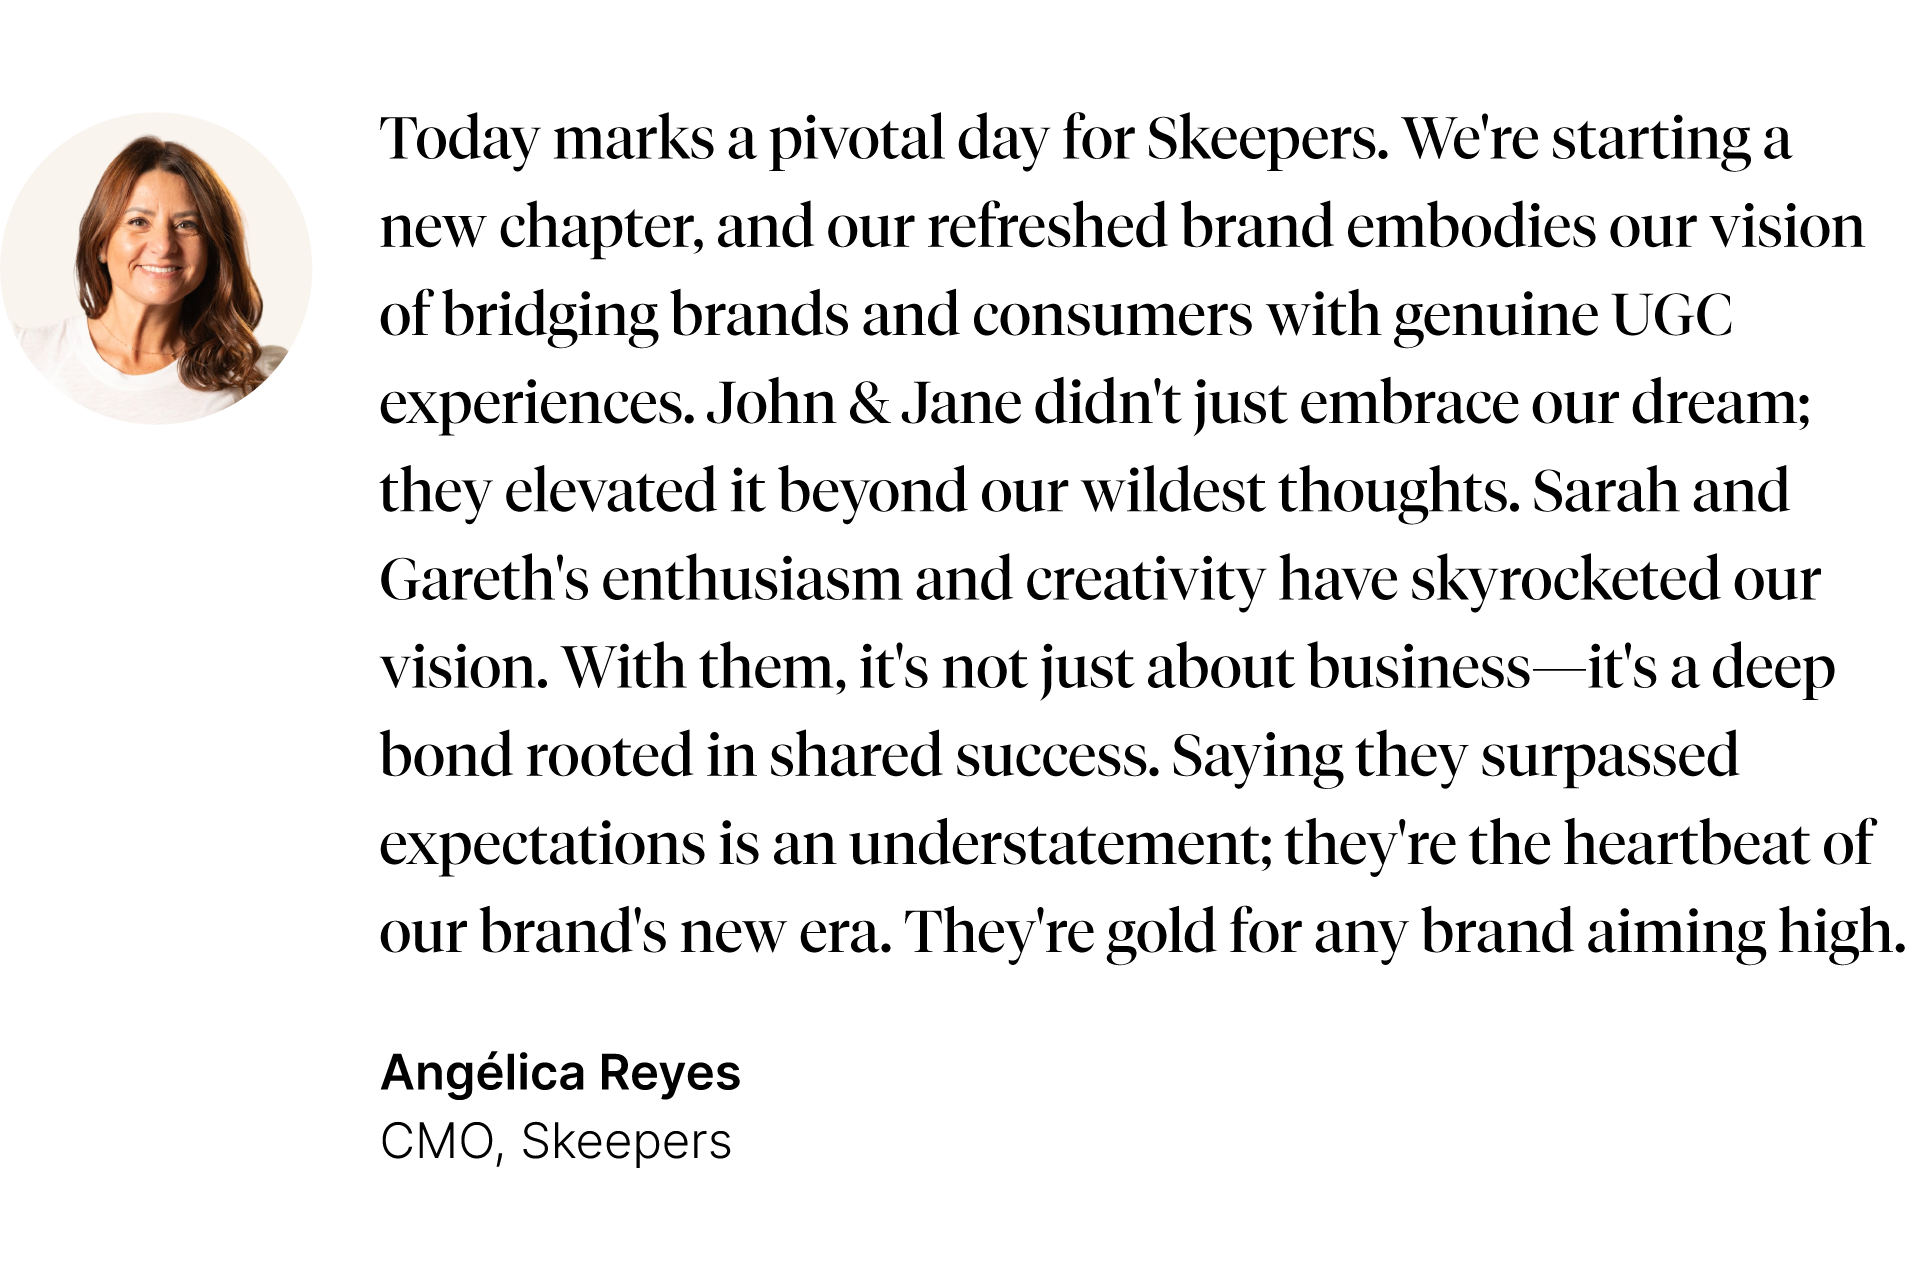 Testimonial from Angélica Reyes, CMO, Skeepers. Today marks a pivotal day for Skeepers. We're starting a new chapter, and our refreshed brand embodies our vision of bridging brands and consumers with genuine UGC experiences. John and Jane didn't just embrace our dream; they elevated it beyond our wildest thoughts. Sarah and Gareth's enthusiasm and creativity have skyrocketed our vision. With them, it's not just about business—it's a deep bond rooted in shared success. Saying they surpassed expectations is an understatement; they're the heartbeat of our brand's new era. They're gold for any brand aiming high.